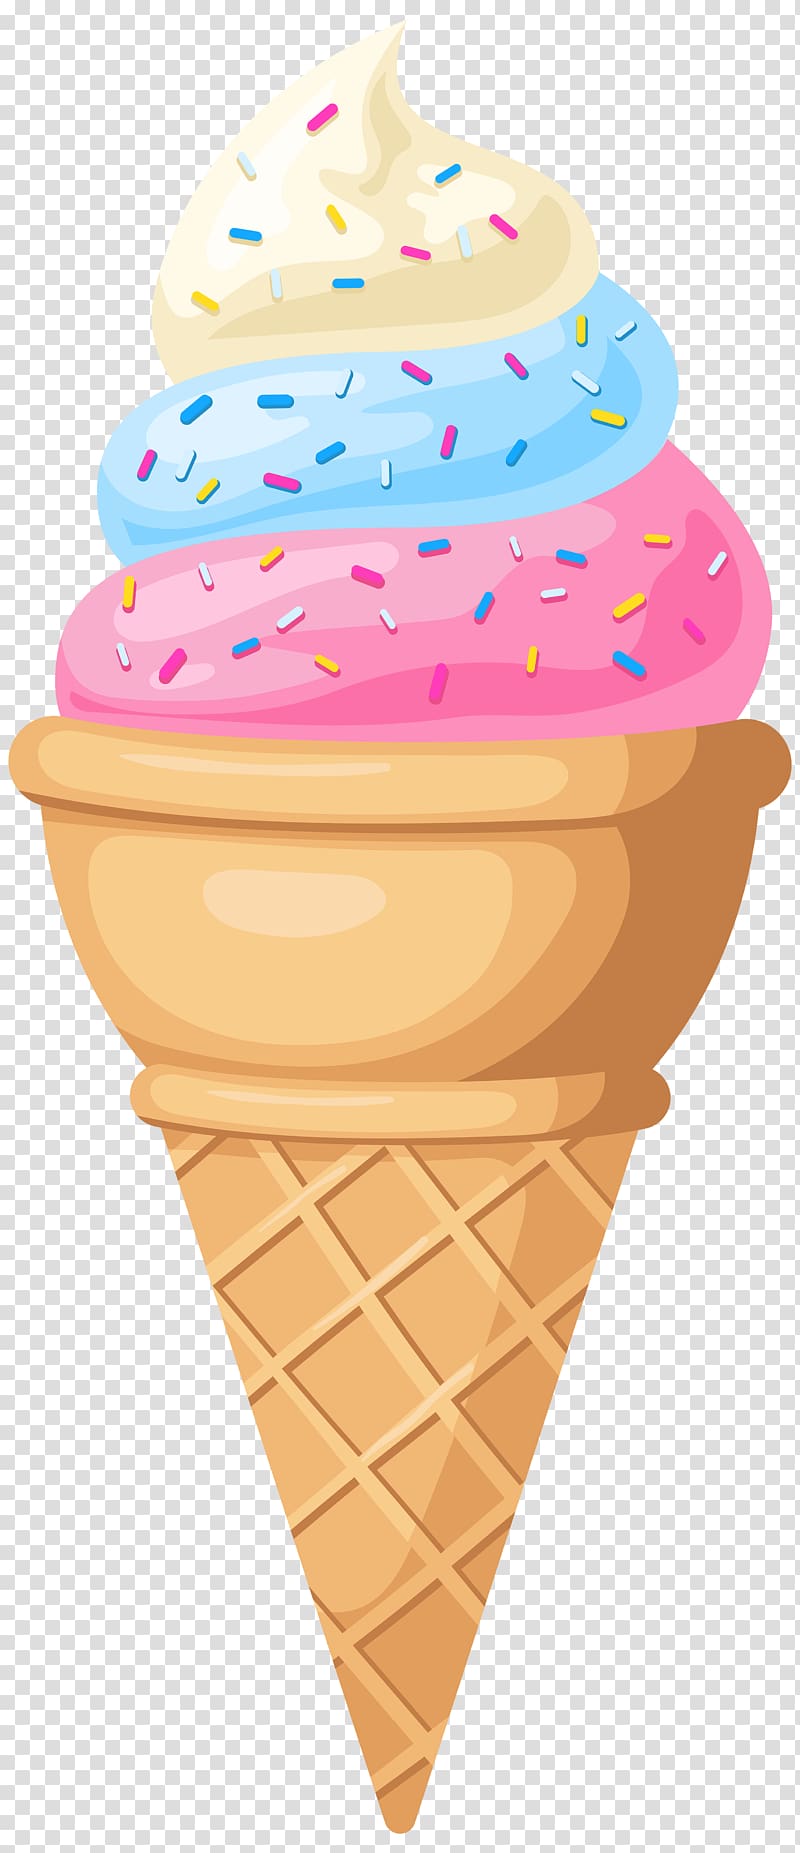 ice cream with cone illustration, Ice Cream Cones Neapolitan ice cream Snow cone, ice cream transparent background PNG clipart